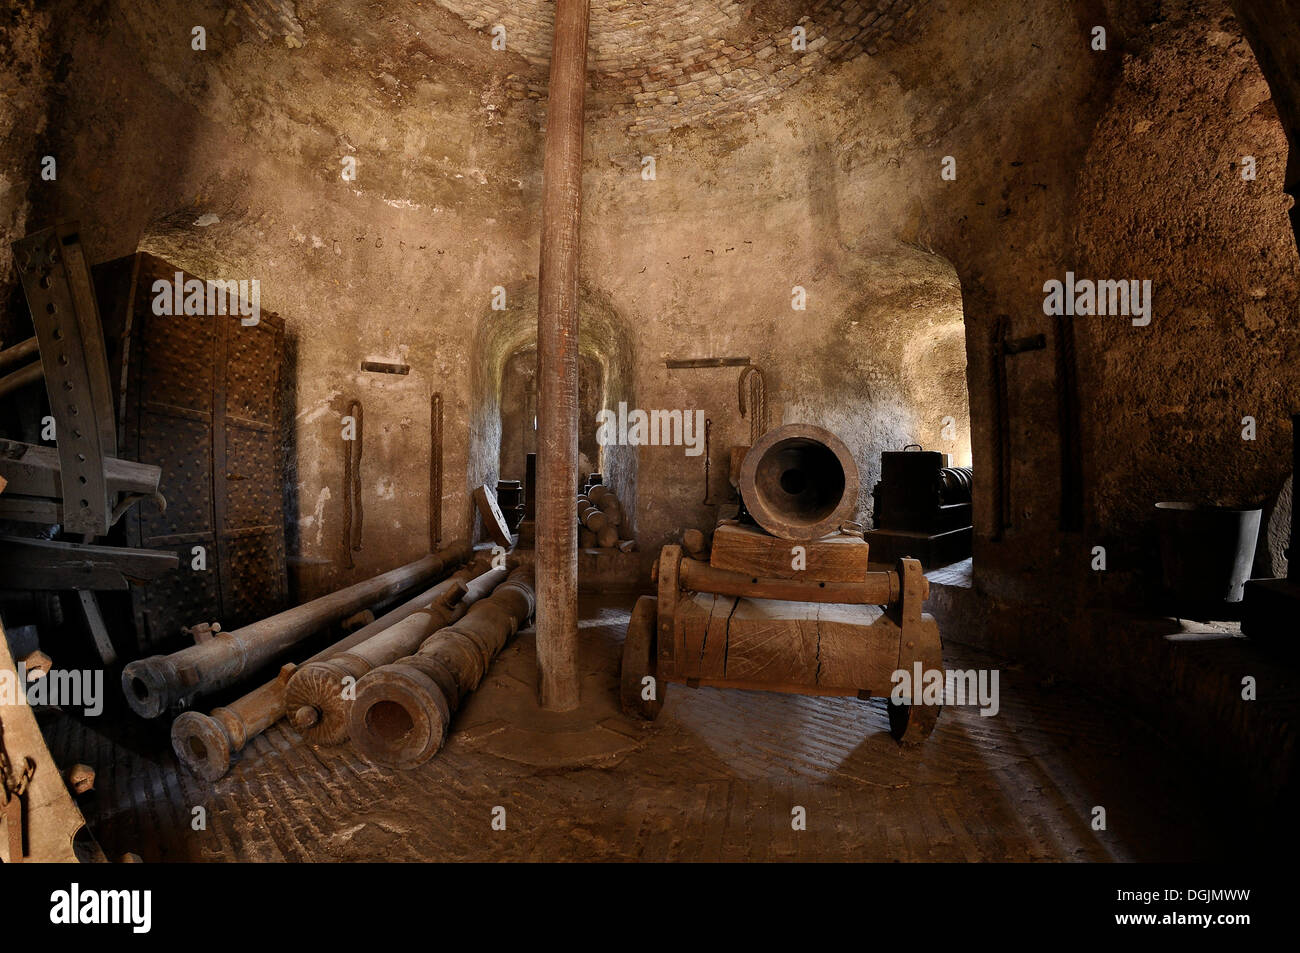 Armoury in the Castel Sant'Angelo, also known as Mausoleum of Hadrian, Rome, Latium region, Italy, Europe Stock Photo